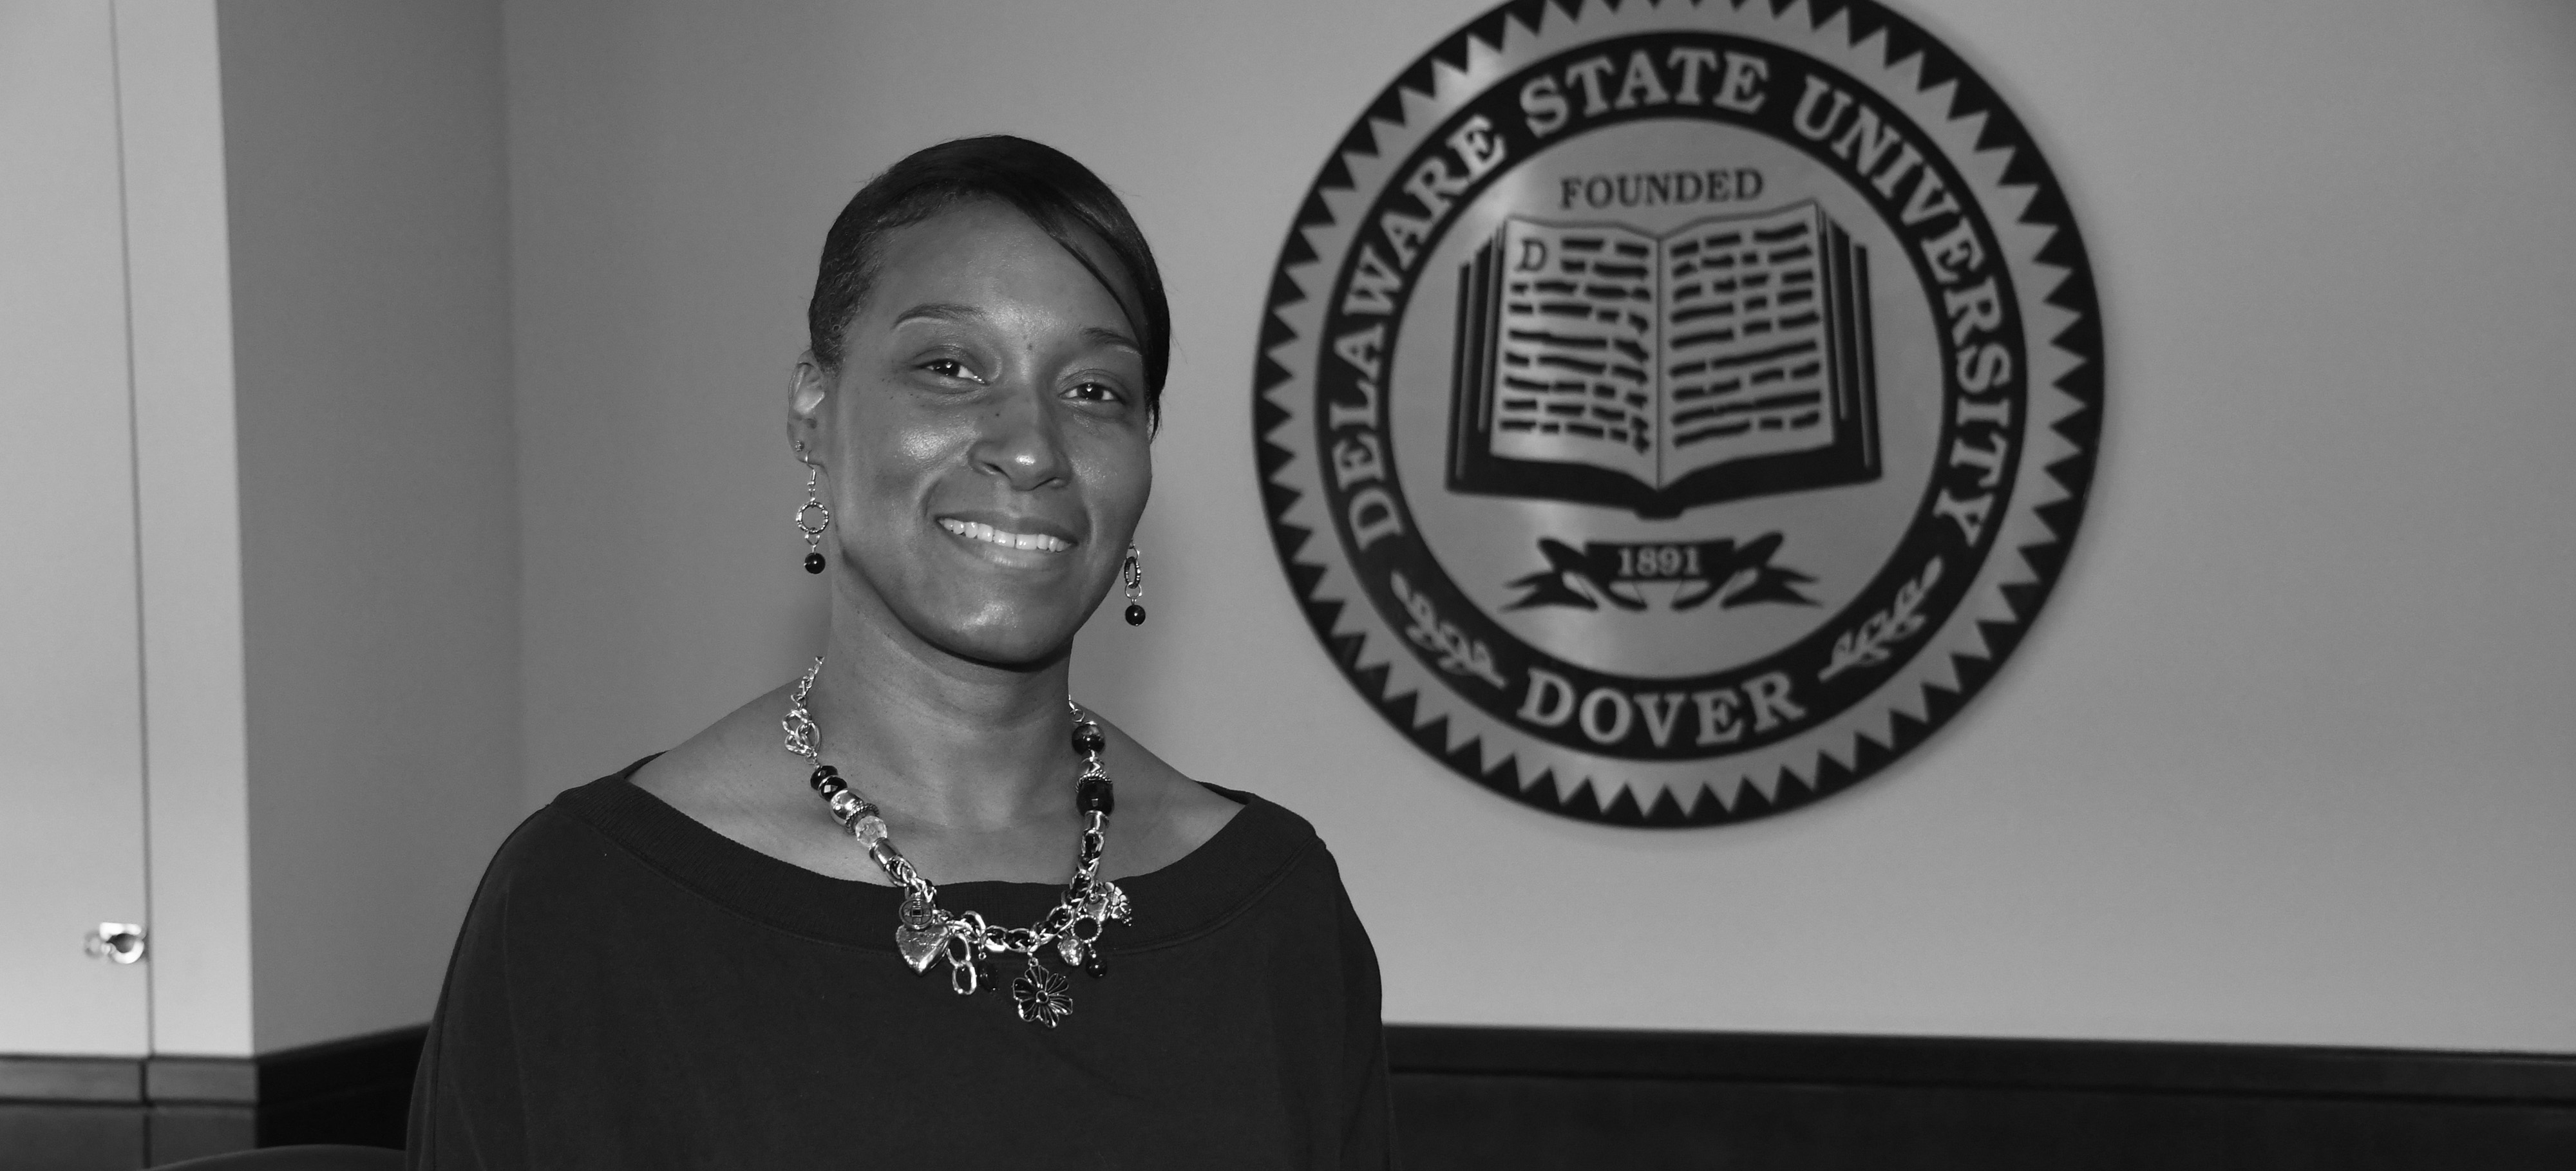 Tamara Stoner's exploits as a track star in high school and college has won her an induction into the Delaware Track and Field Hall of Fame.